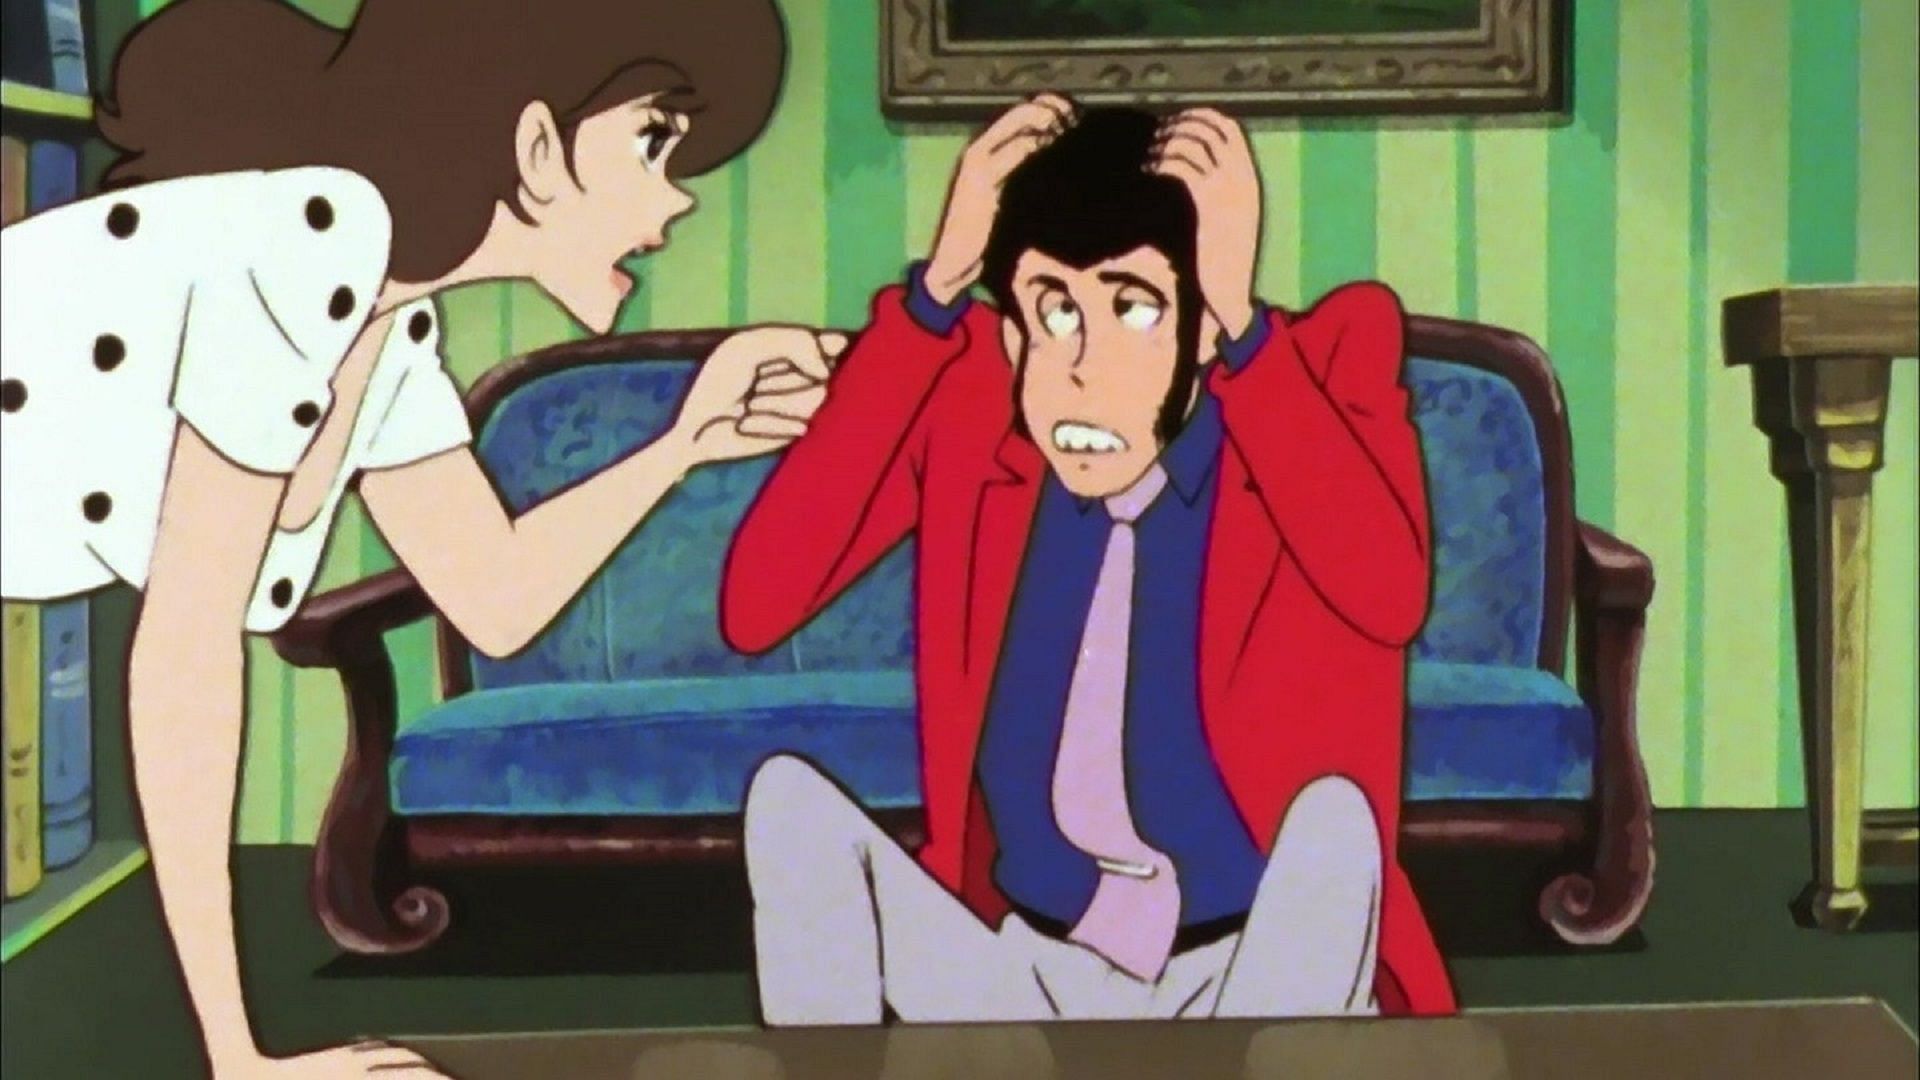 Lupin the Third Anime: Complete watch order and Where to Watch